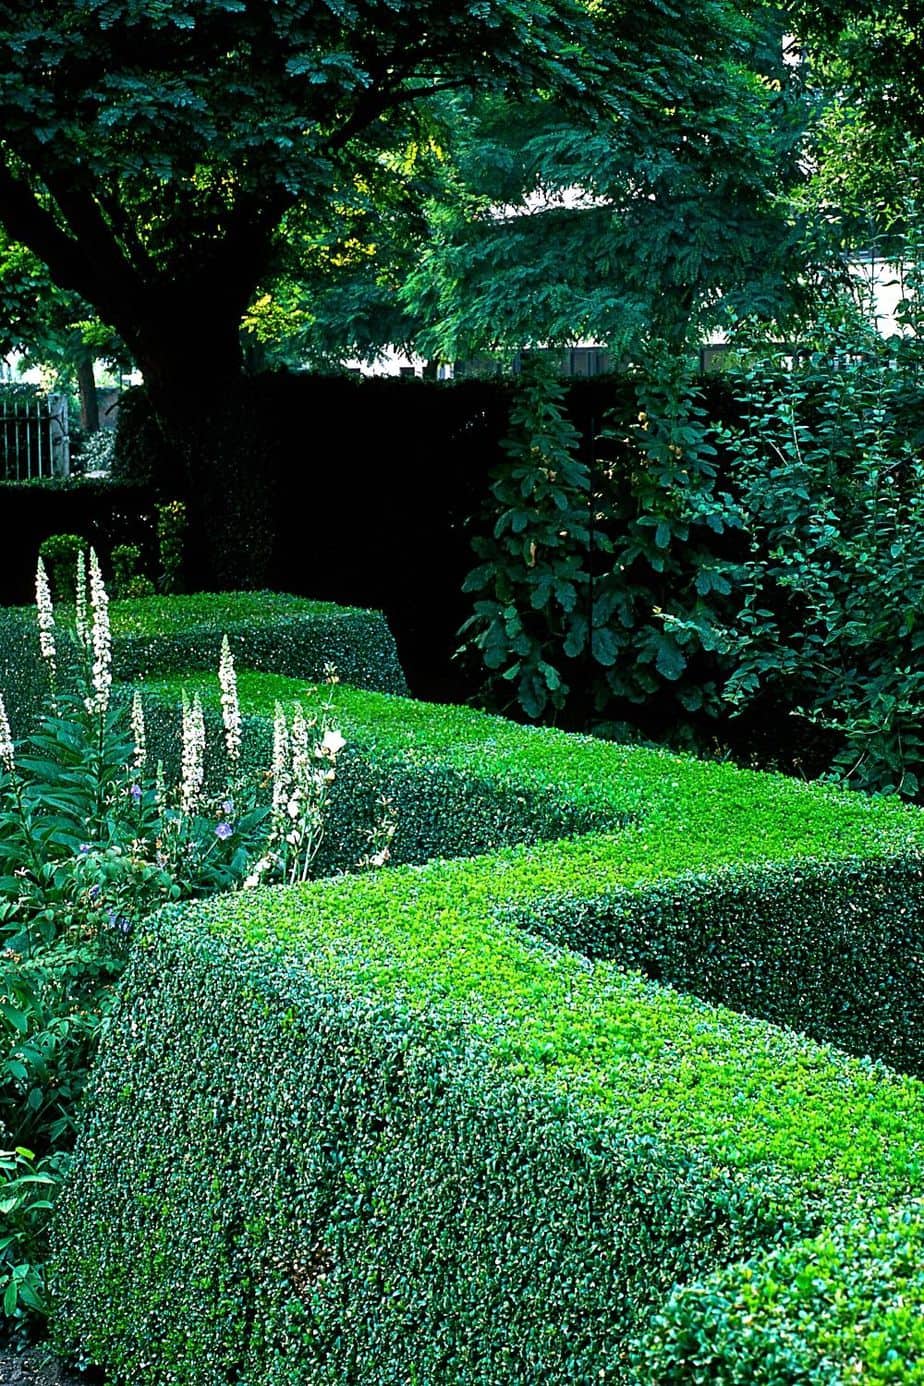 Boxwood is known for its dark, green leaves that are great for growing for privacy